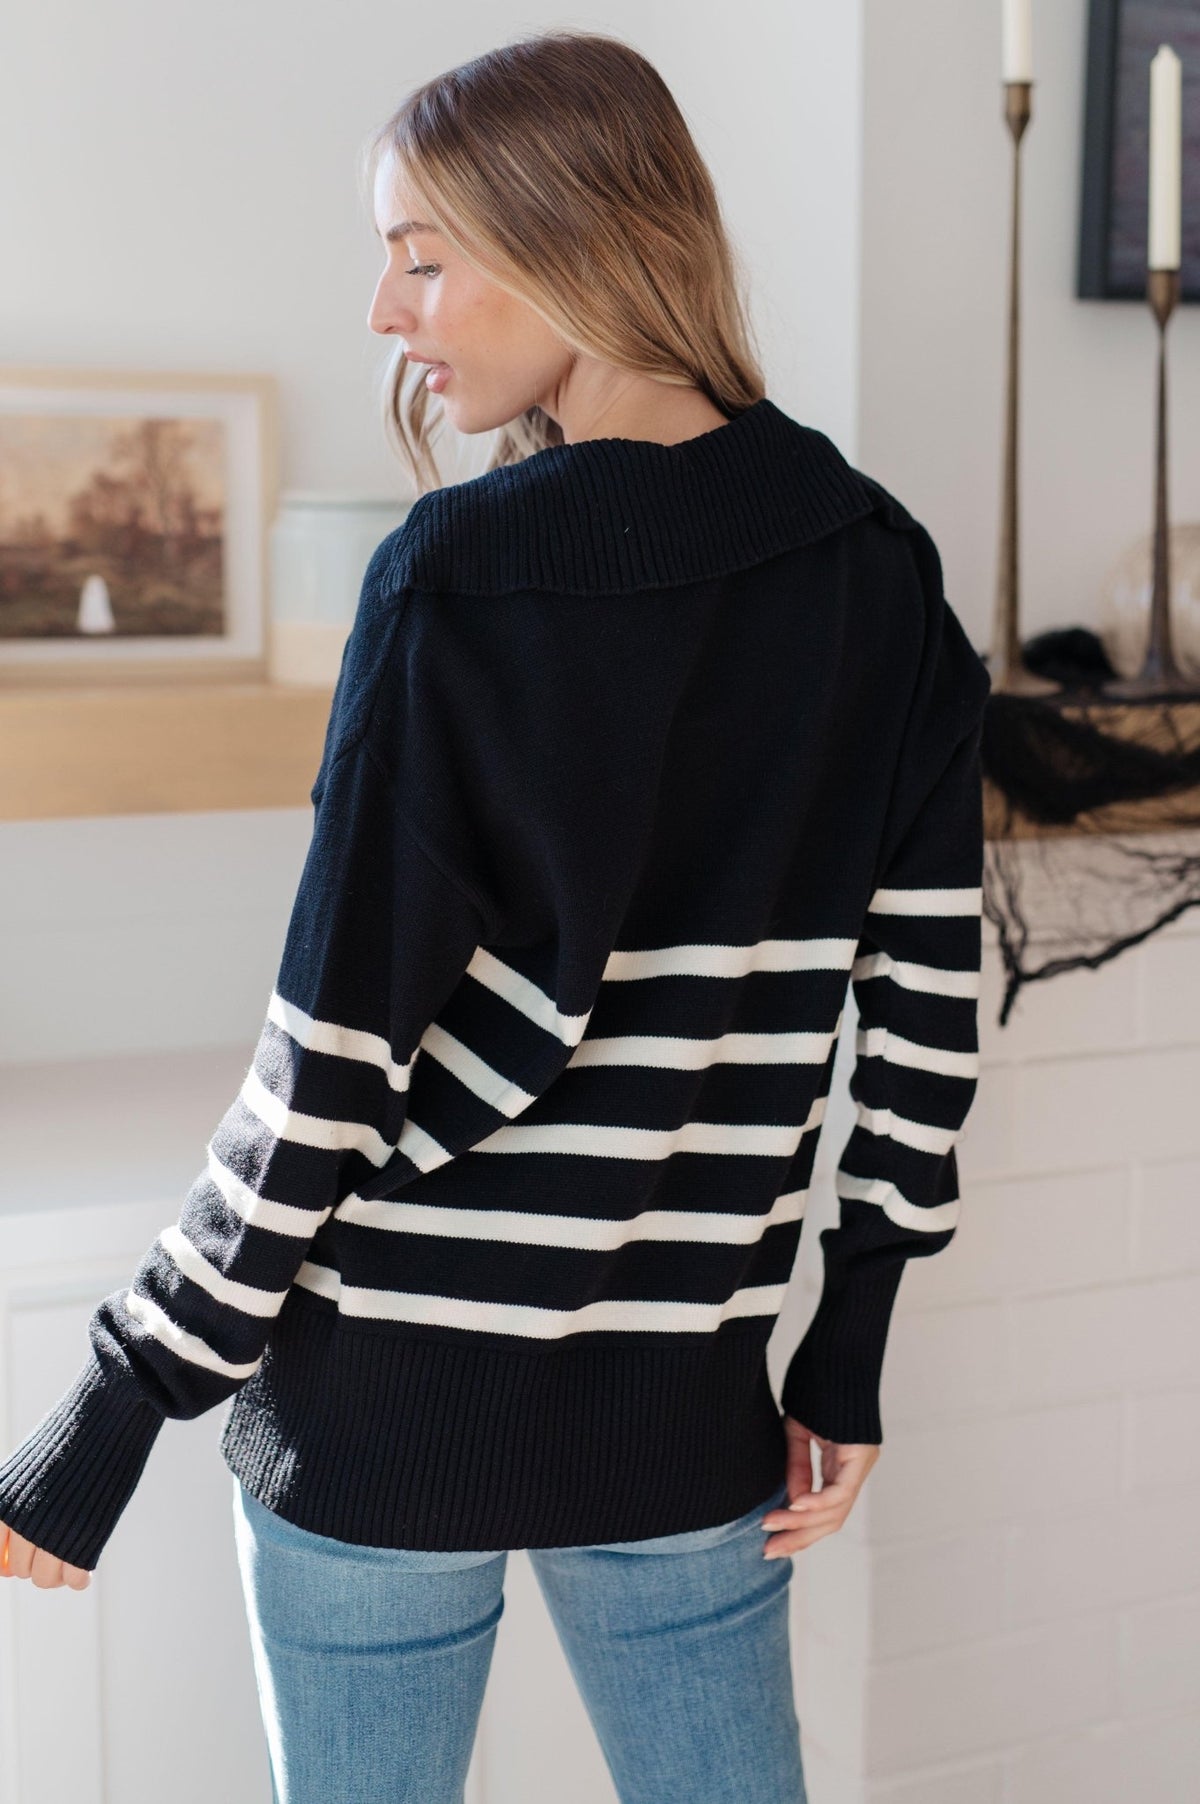 From Here On Out Striped Sweater - Happily Ever Atchison Shop Co.